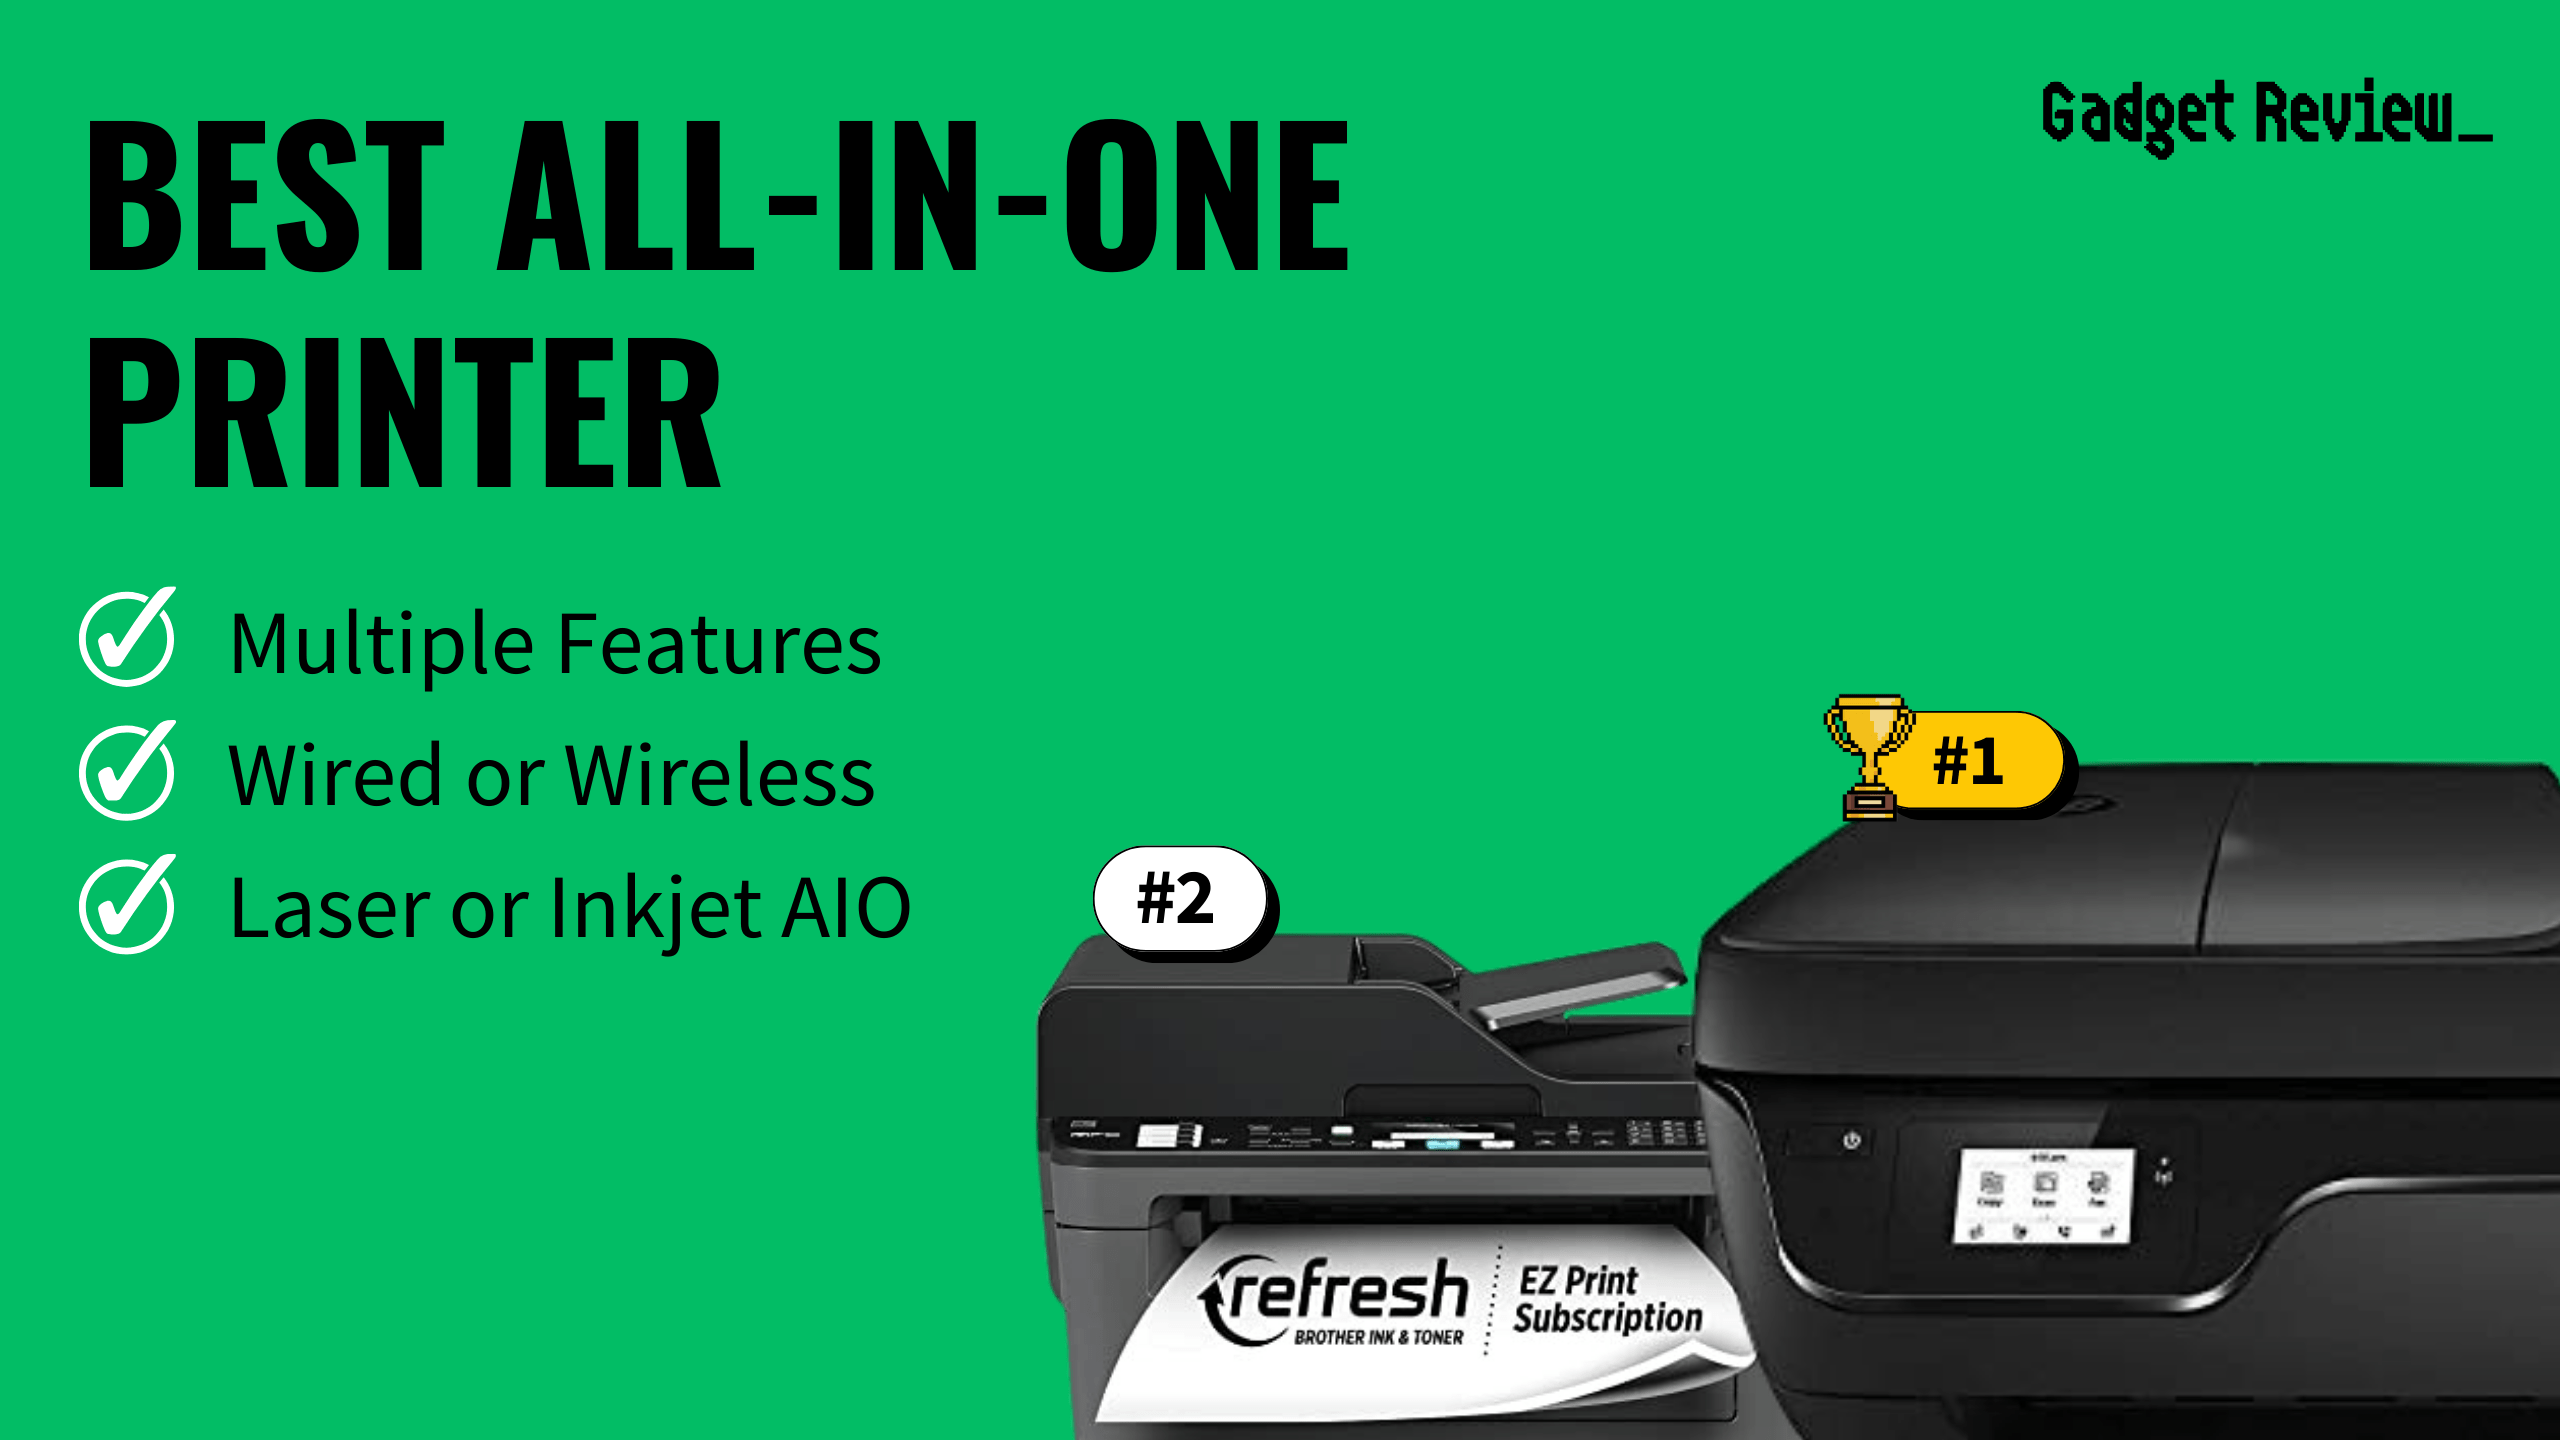 Best All-in-One Printer